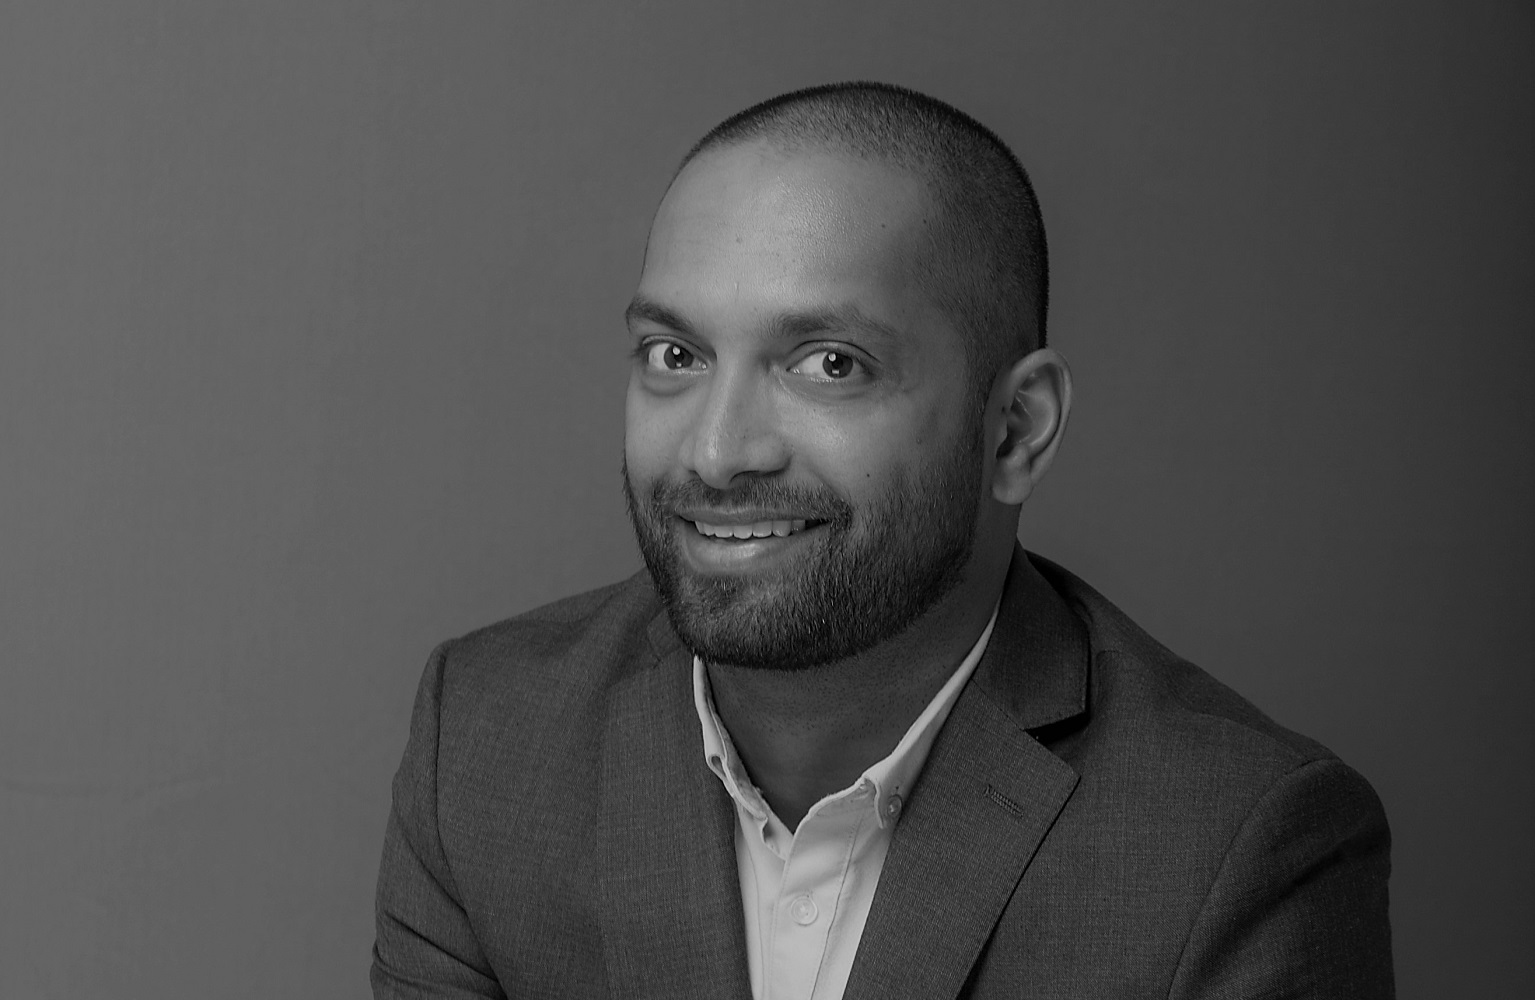 Dentsu MENA Appoints Alex Jena as Head of Strategy and Product